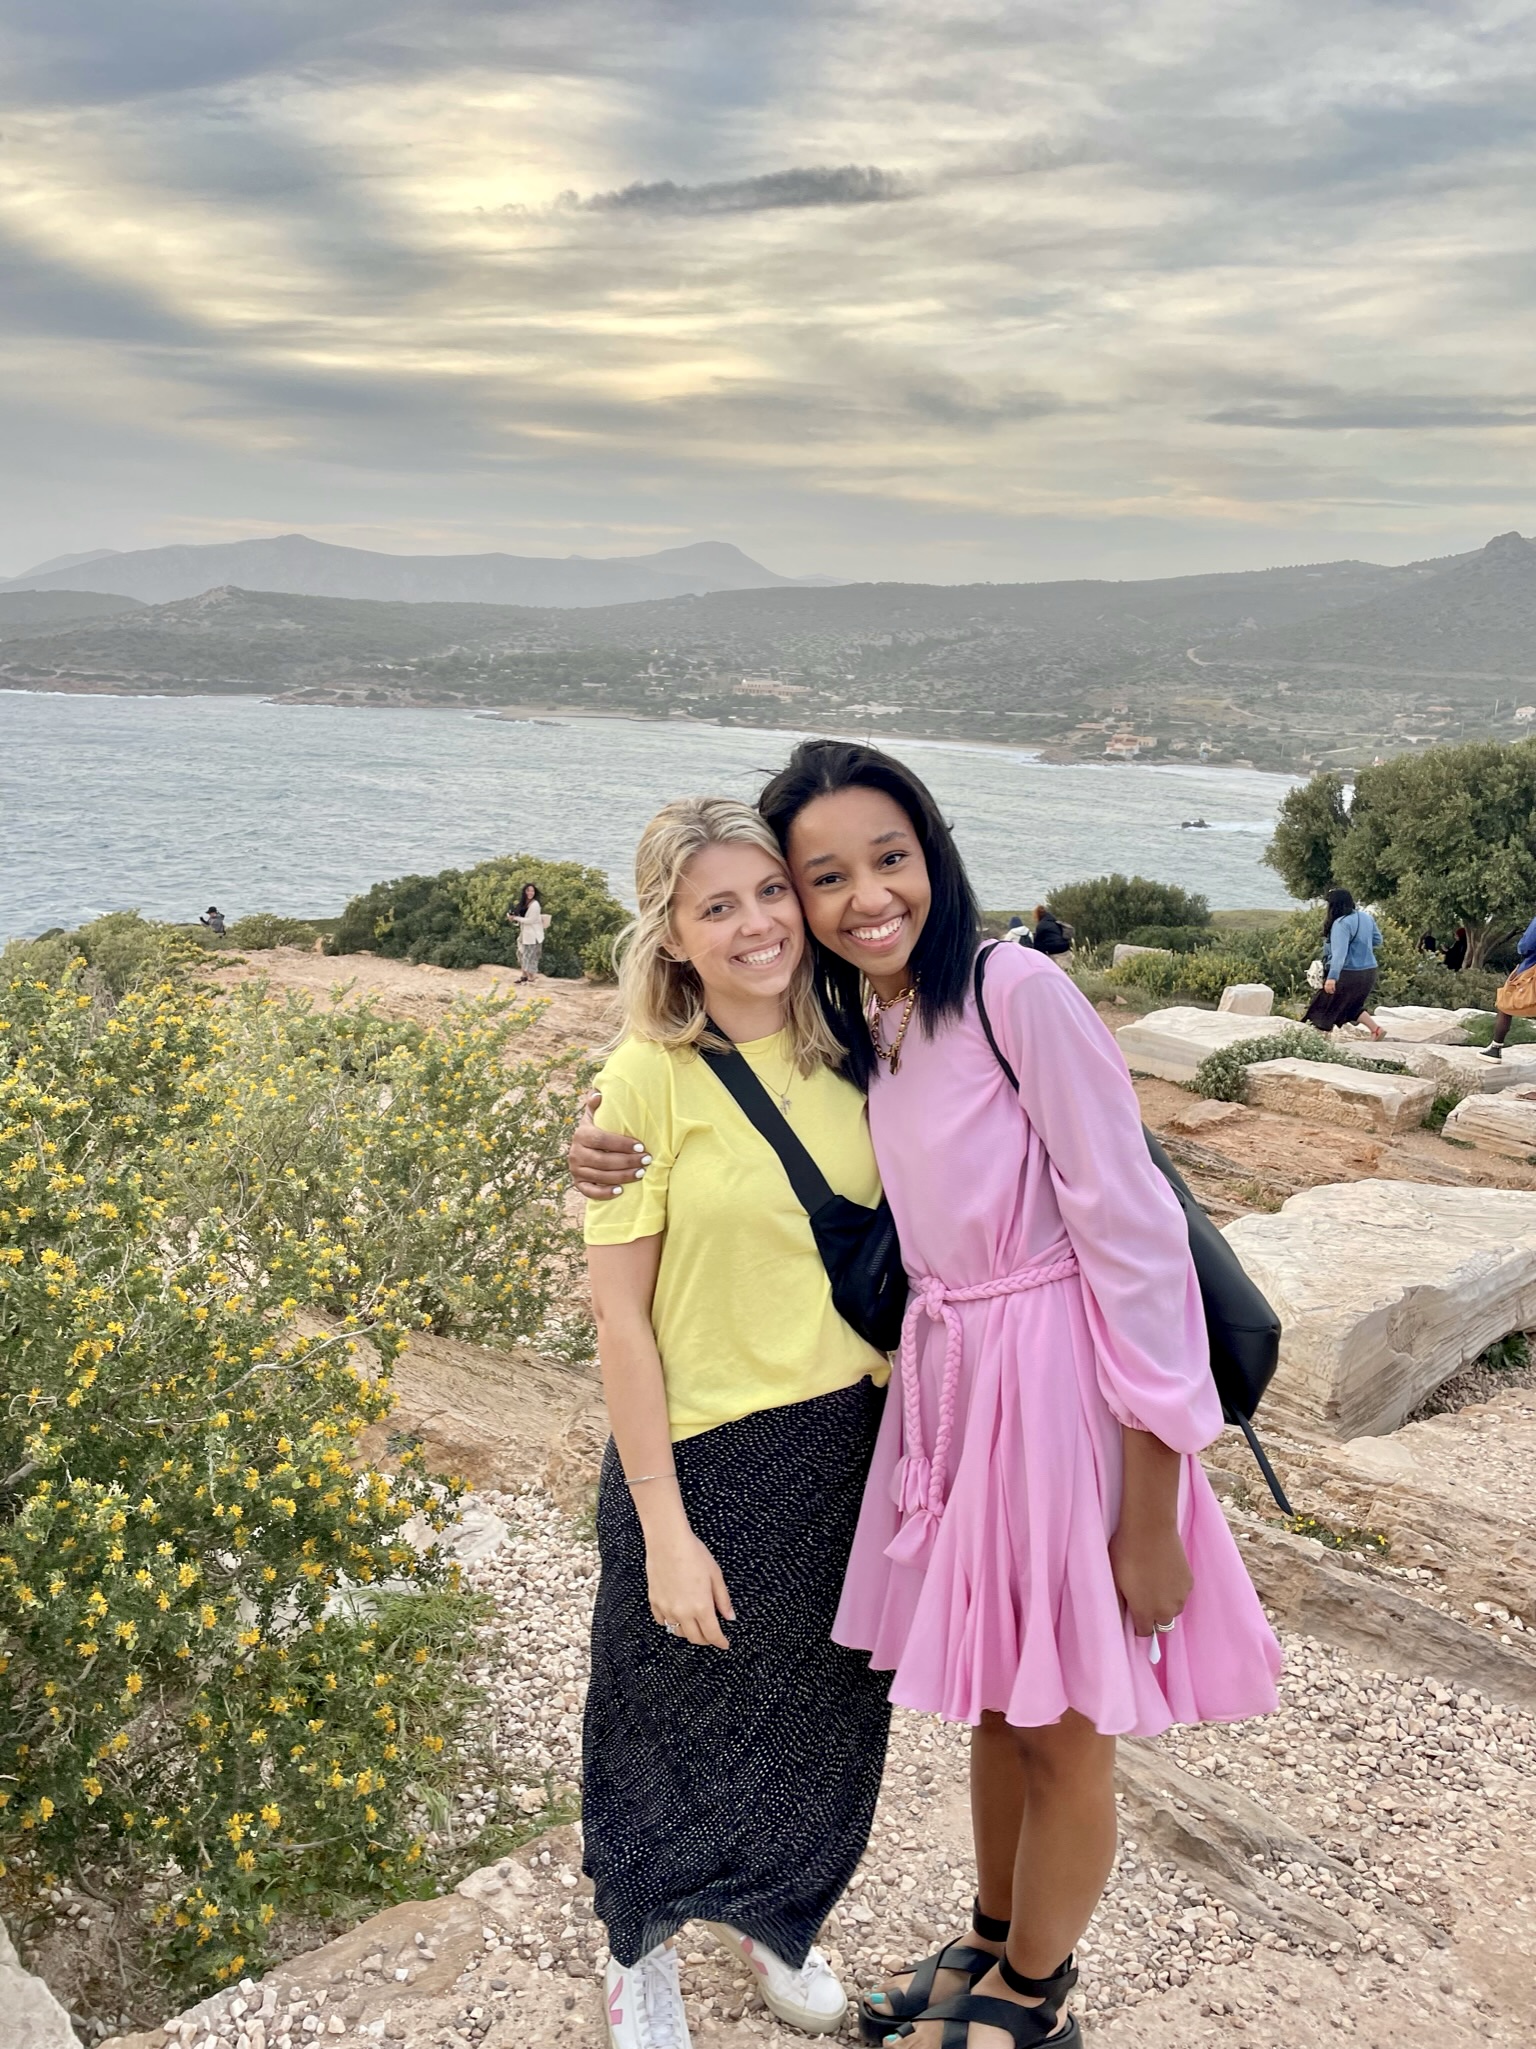 Two women stand closely, smiling at the camera against a scenic backdrop of a coastal landscape with mountains, water, and cloudy skies. One wears a yellow top and black skirt, and the other wears a light pink dress. Wildflowers and greenery are visible in the foreground.